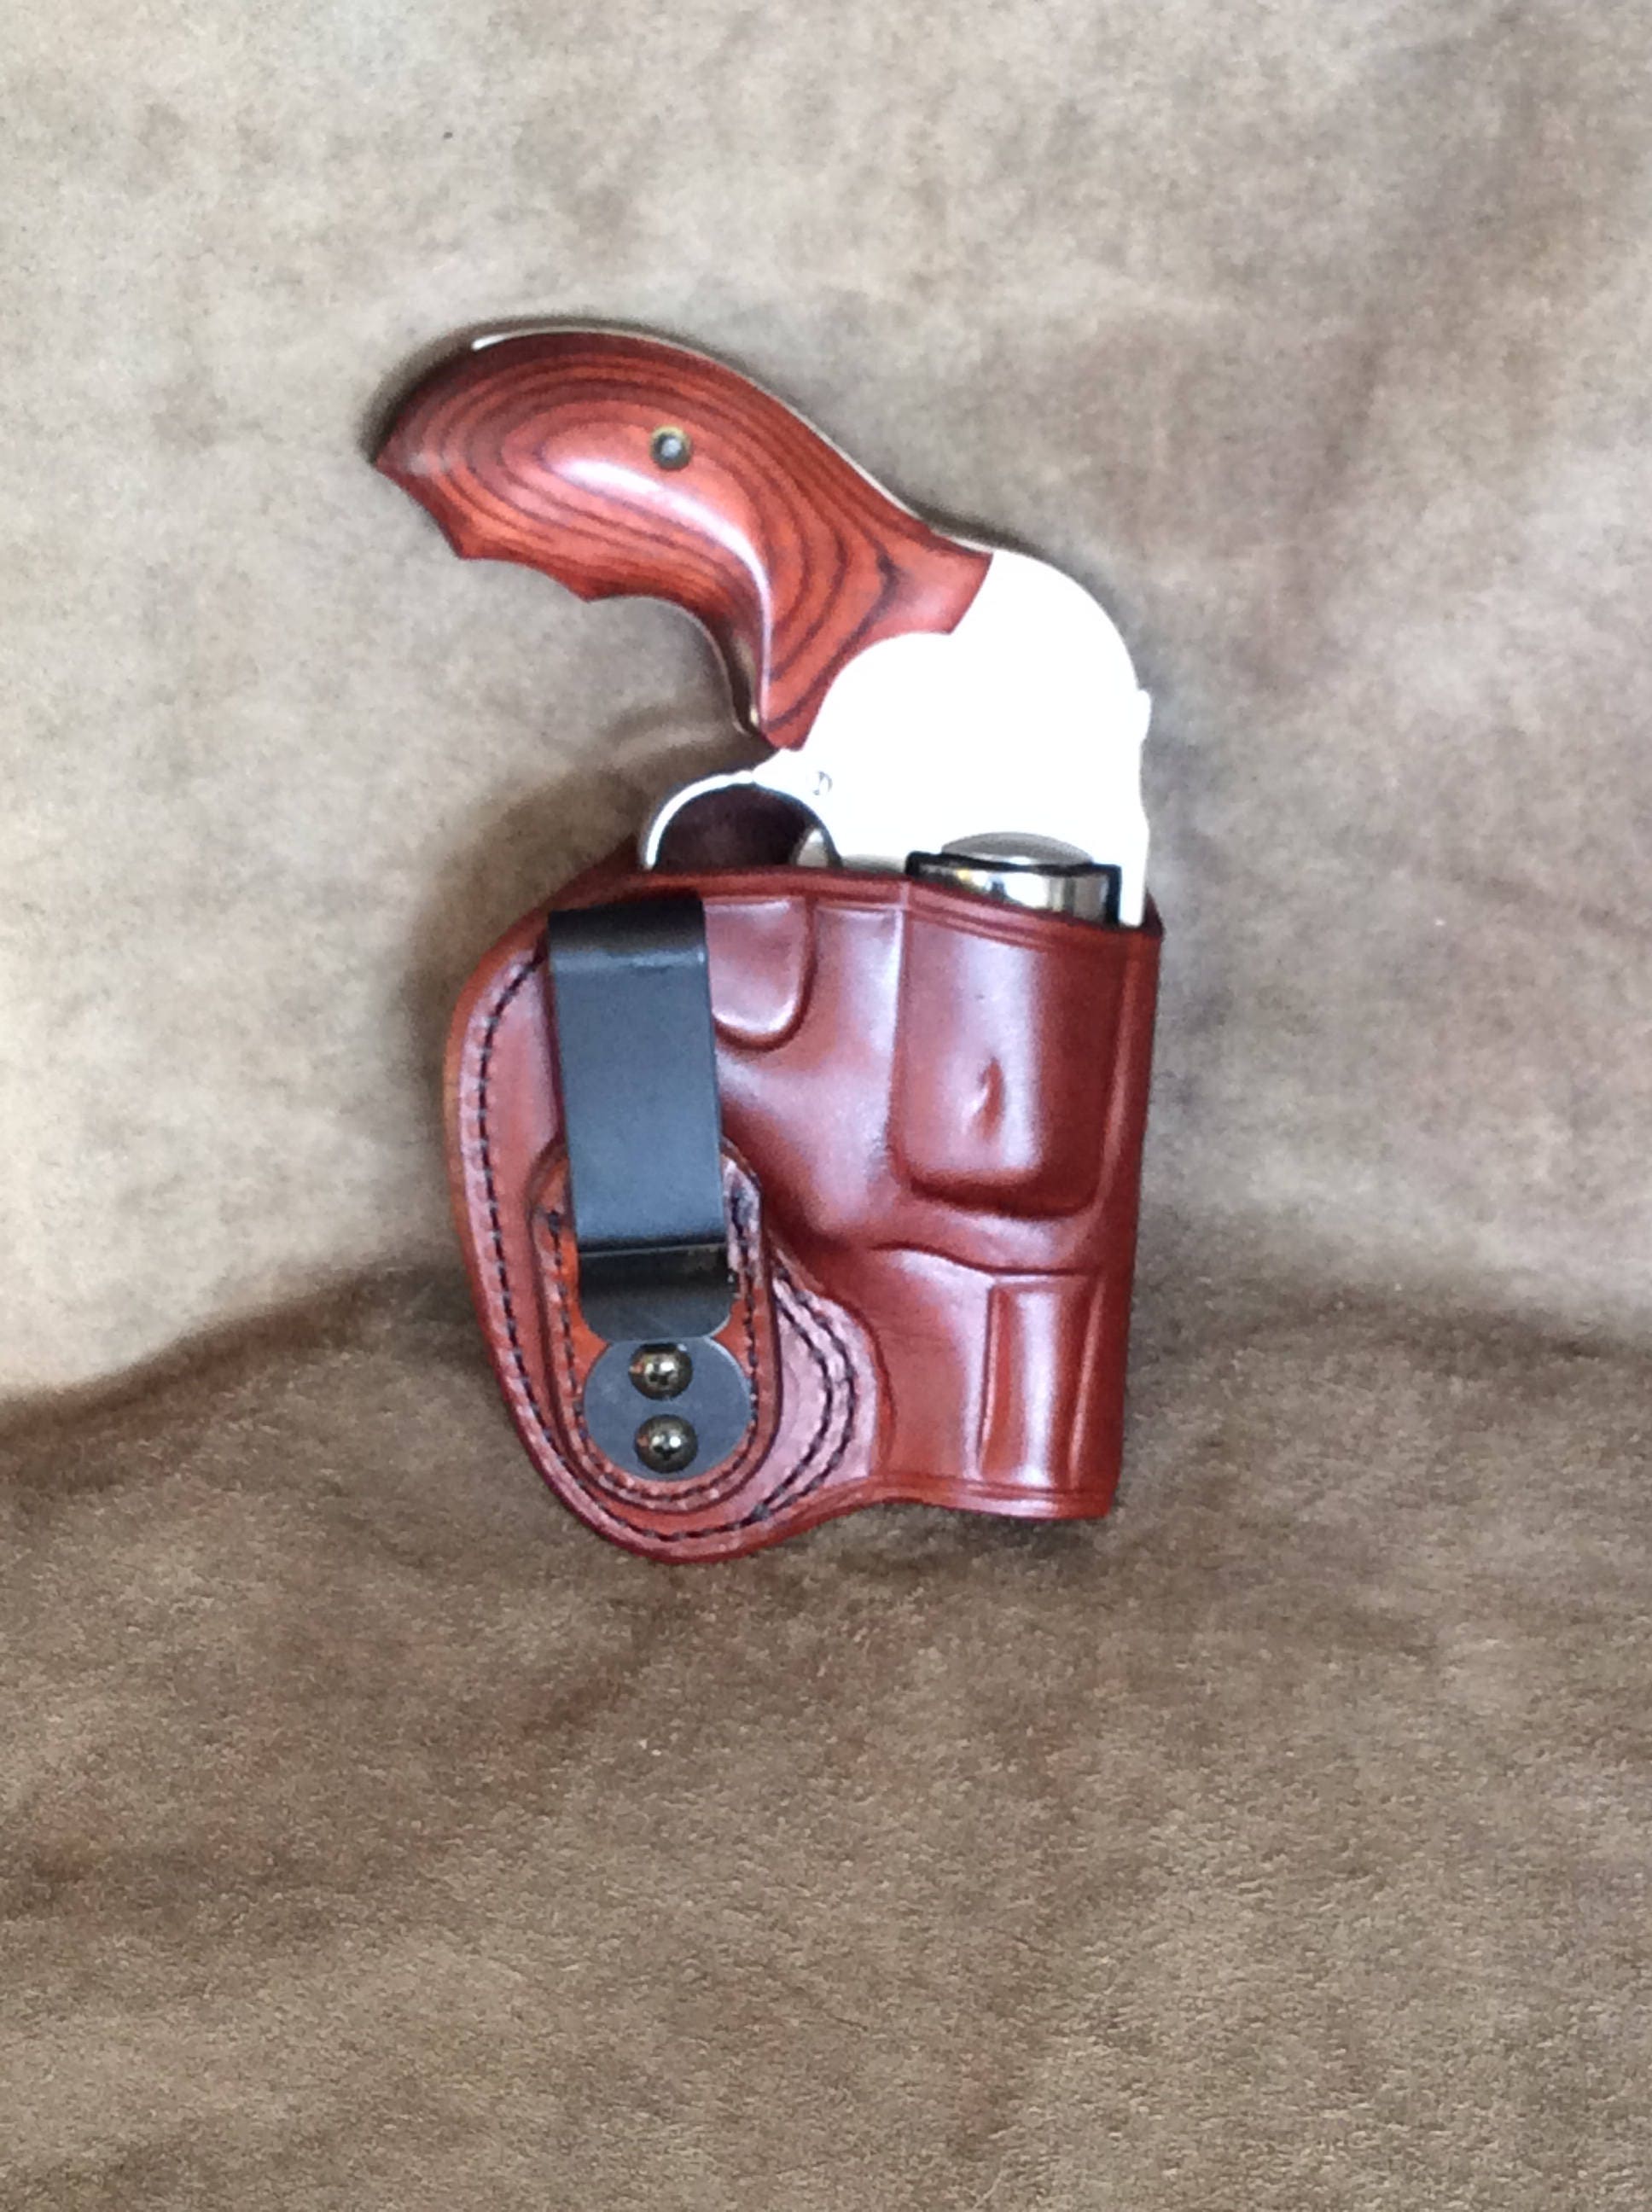 Smith & Wesson 24 3" Revolver S&W IWB Leather In The Waistband Carry Holster TAN